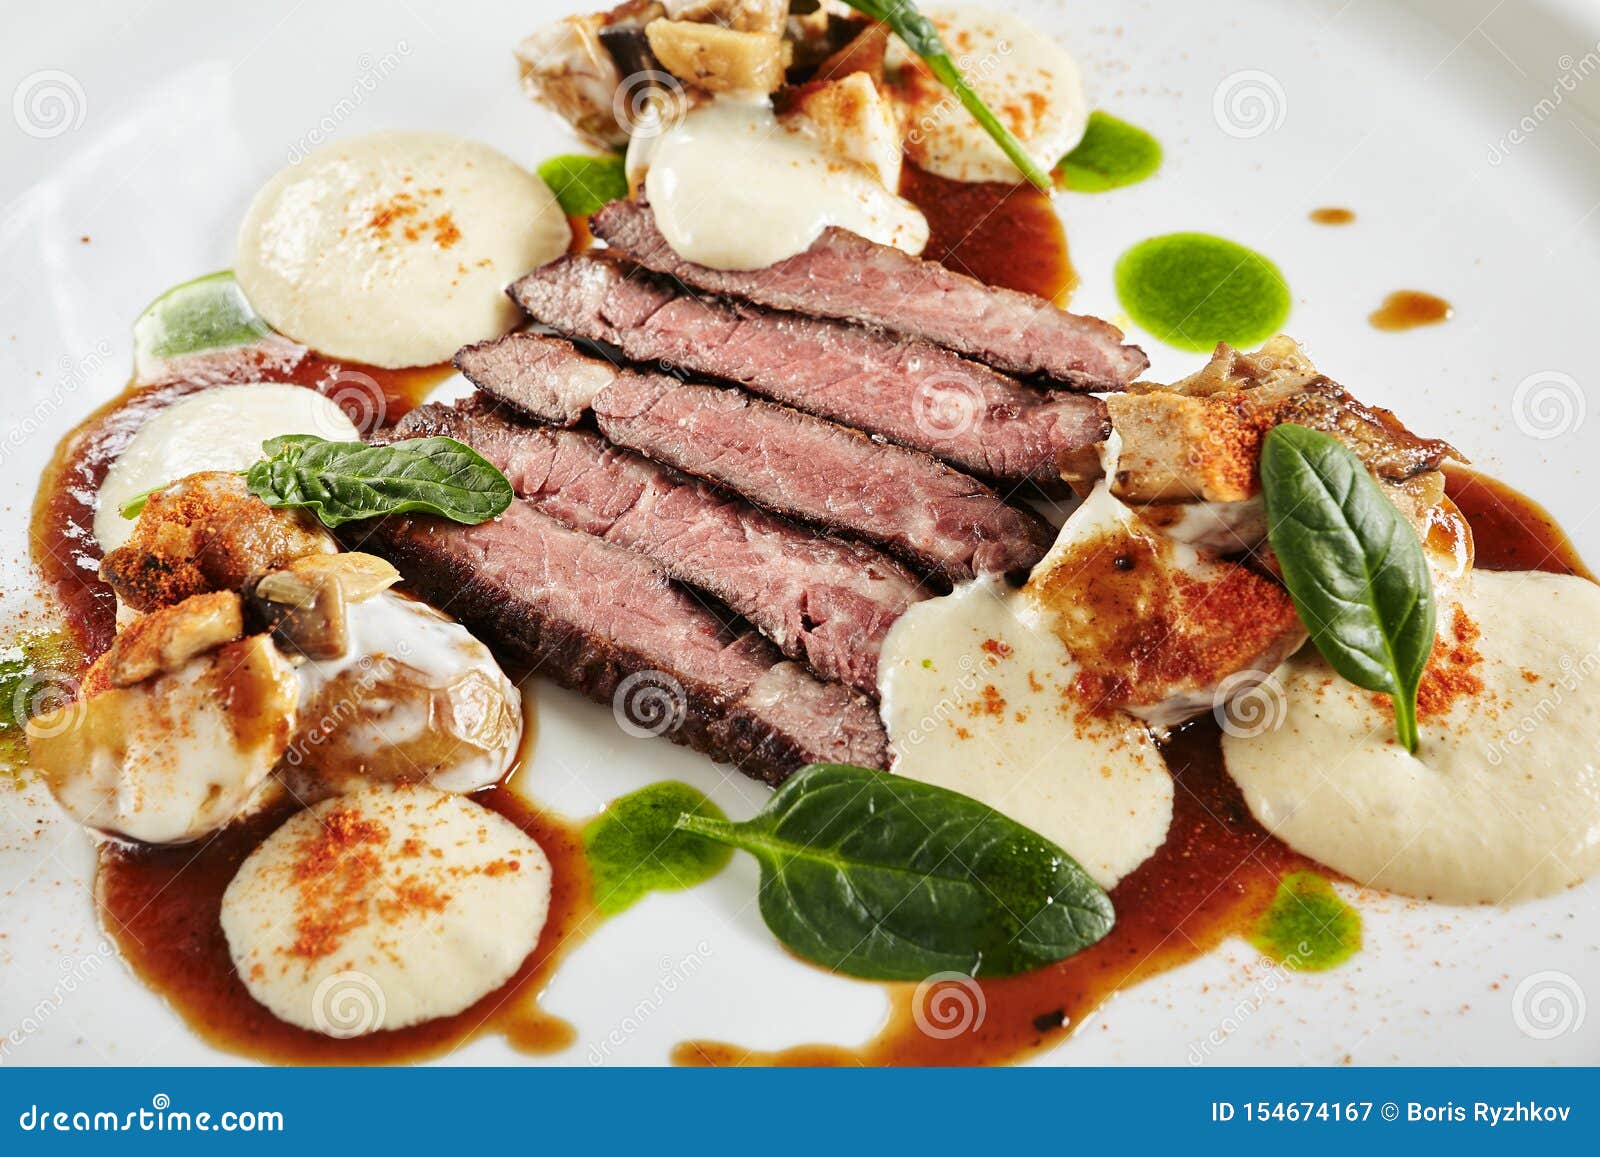 restaurant plate of black angus beef fillet with warm potatoes in cheese sauce and mushroom espuma